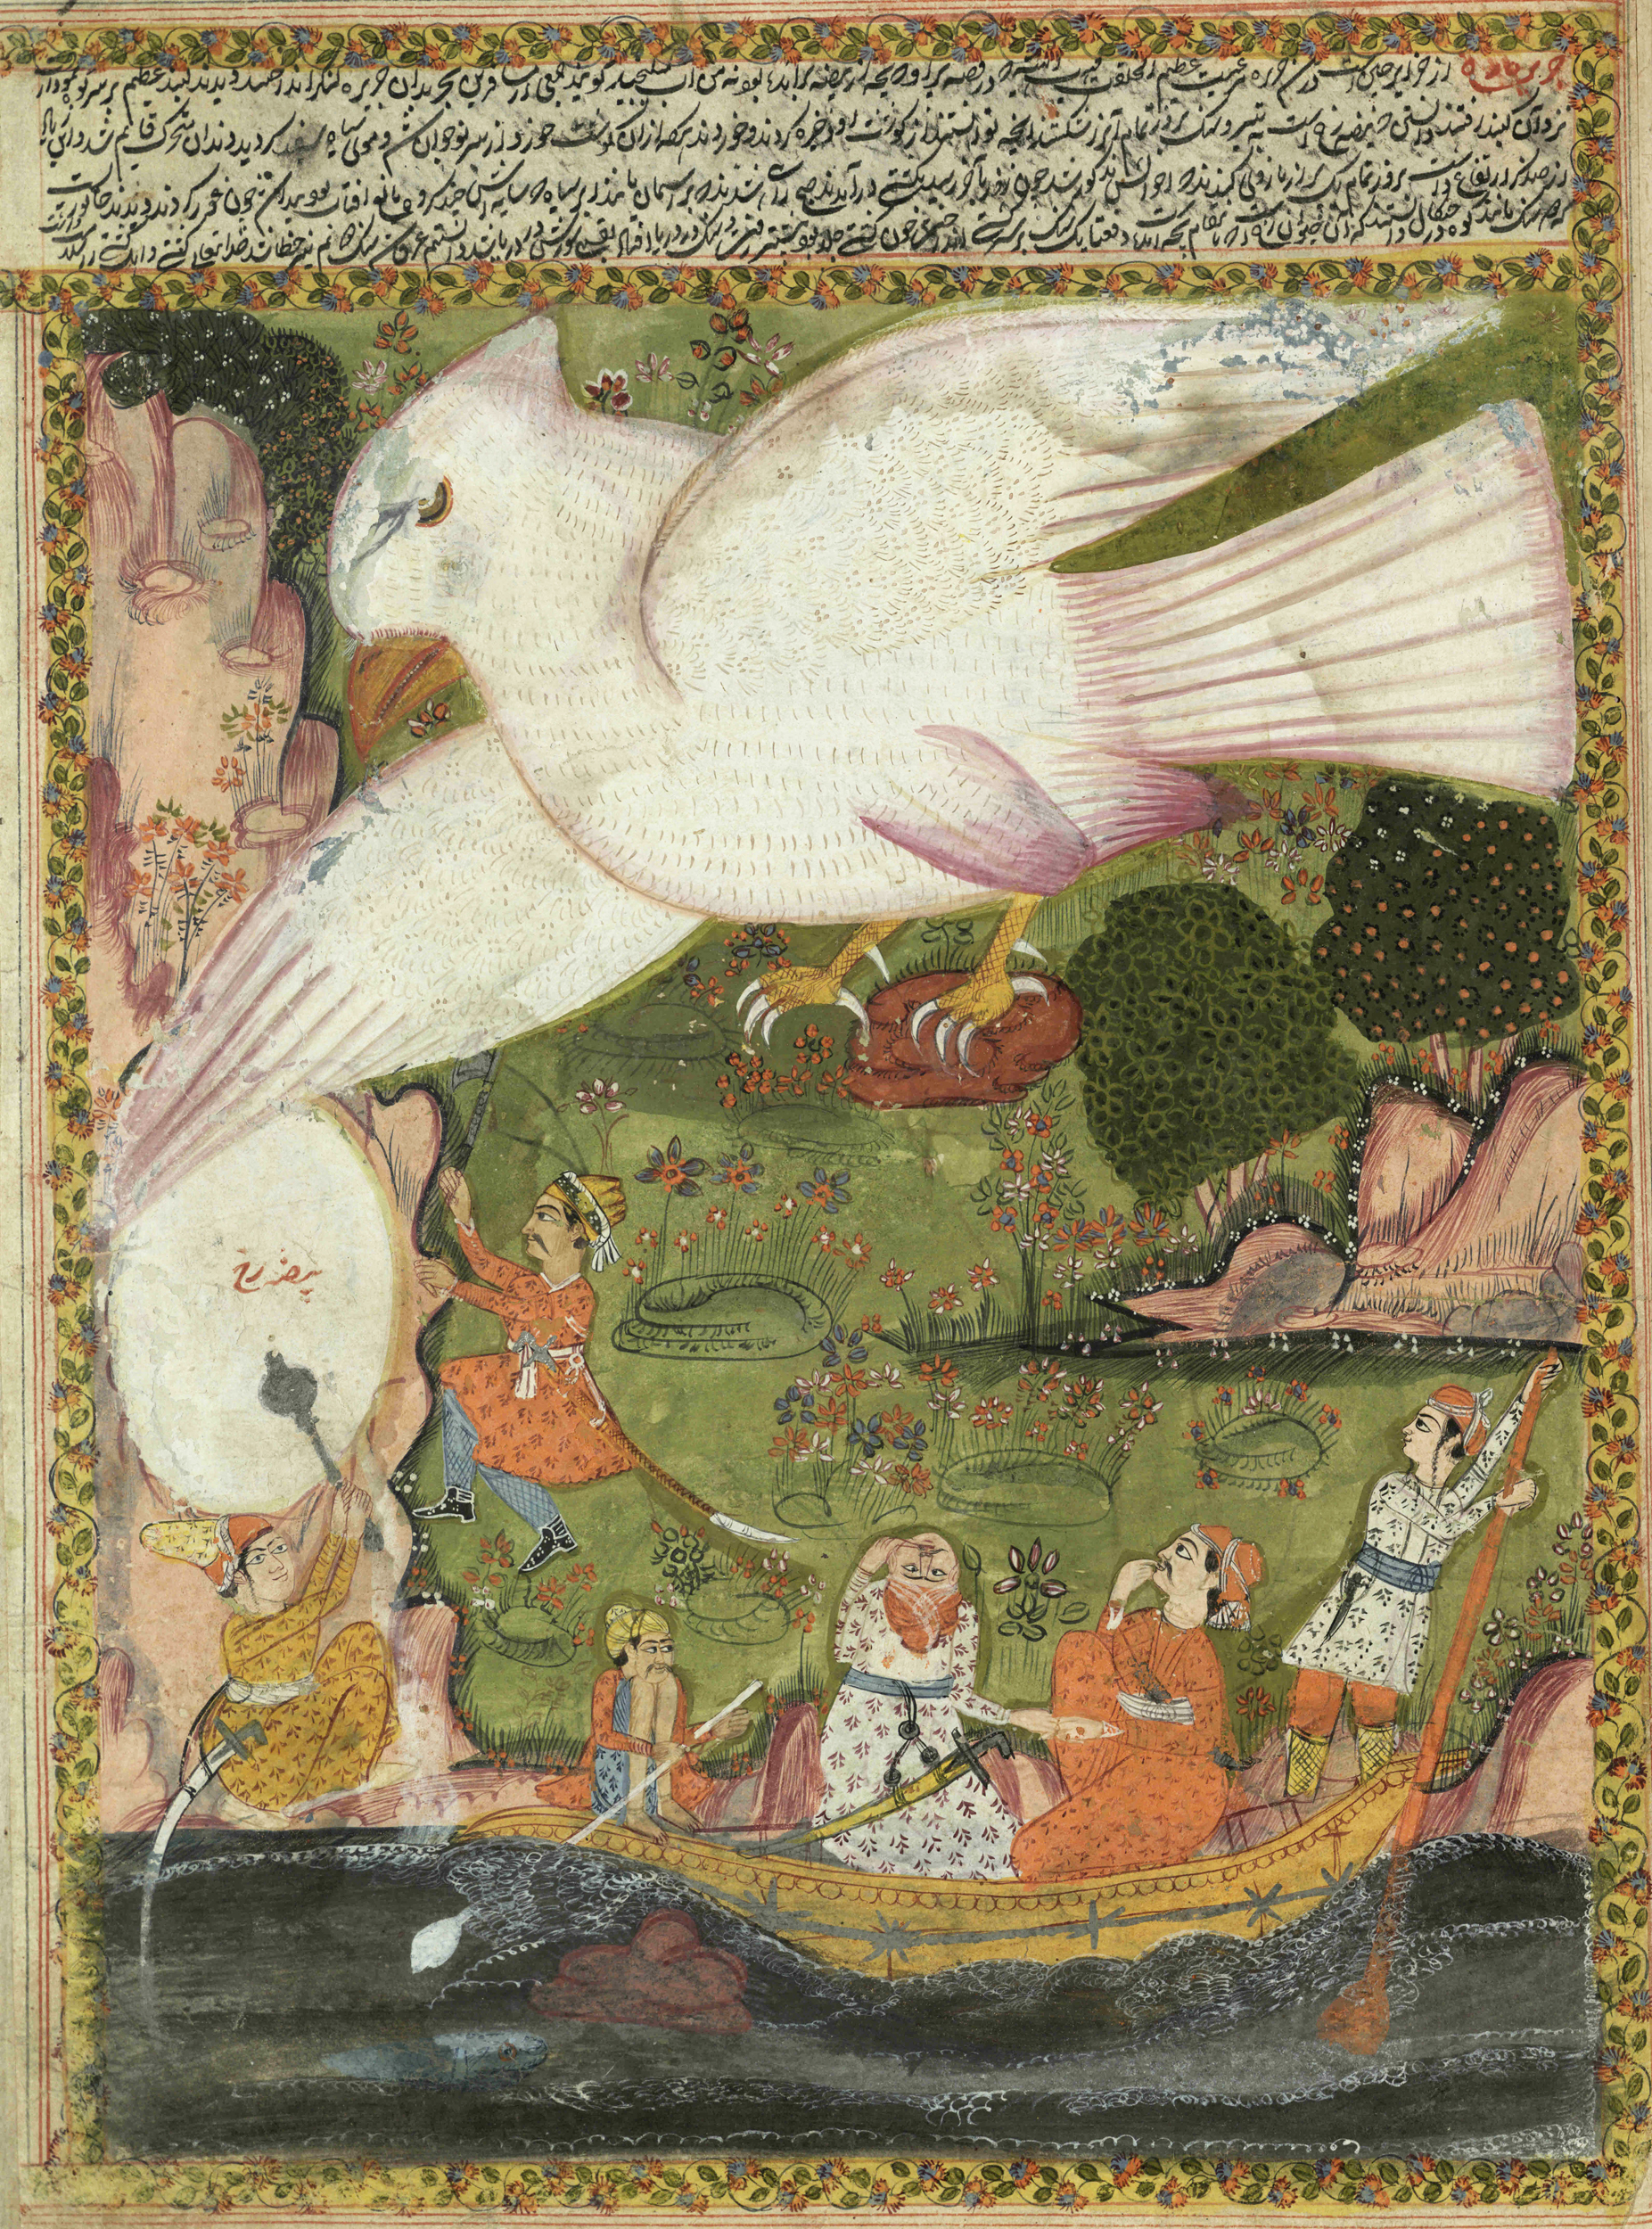 'Island of the giant bird,' from 17th or 18th century manuscript copy of “The Book of Wonders of the Age” (St Andrews ms32(o))